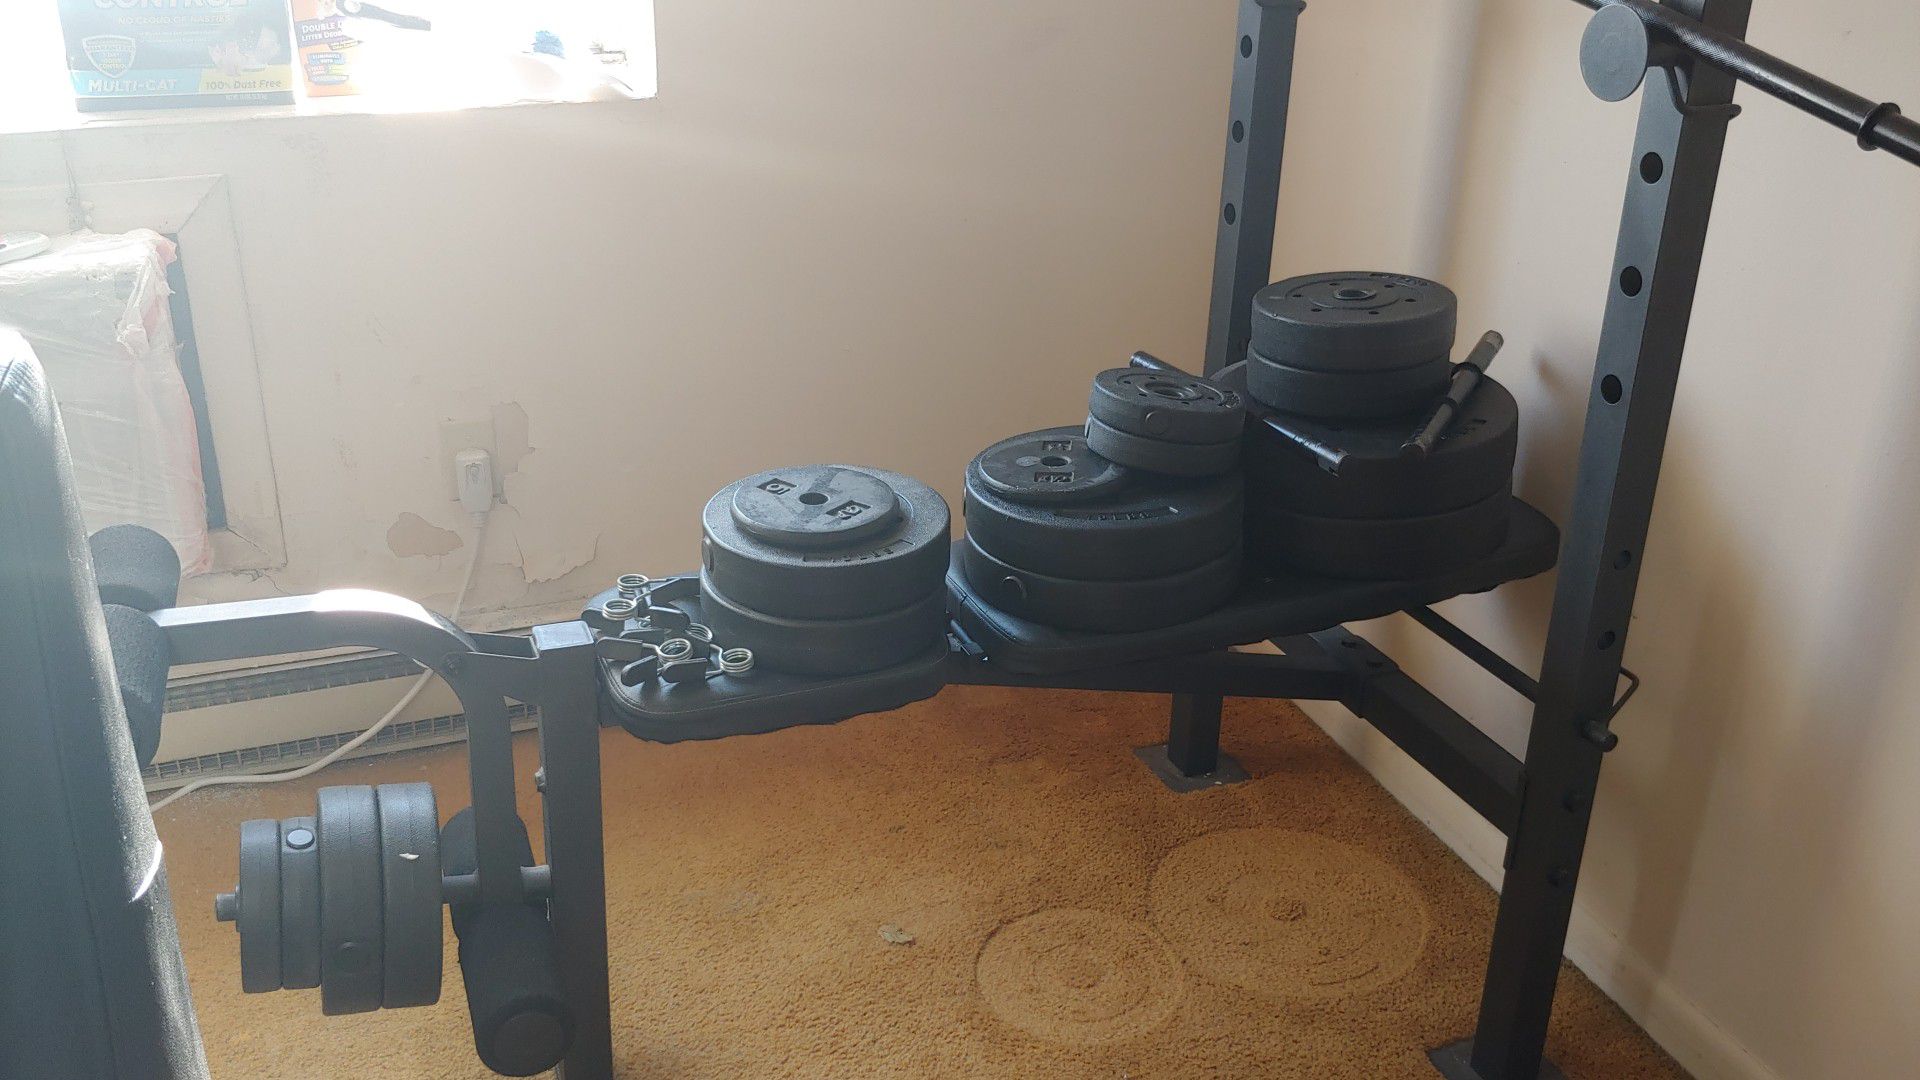 Weight training equipment 150 pound total.